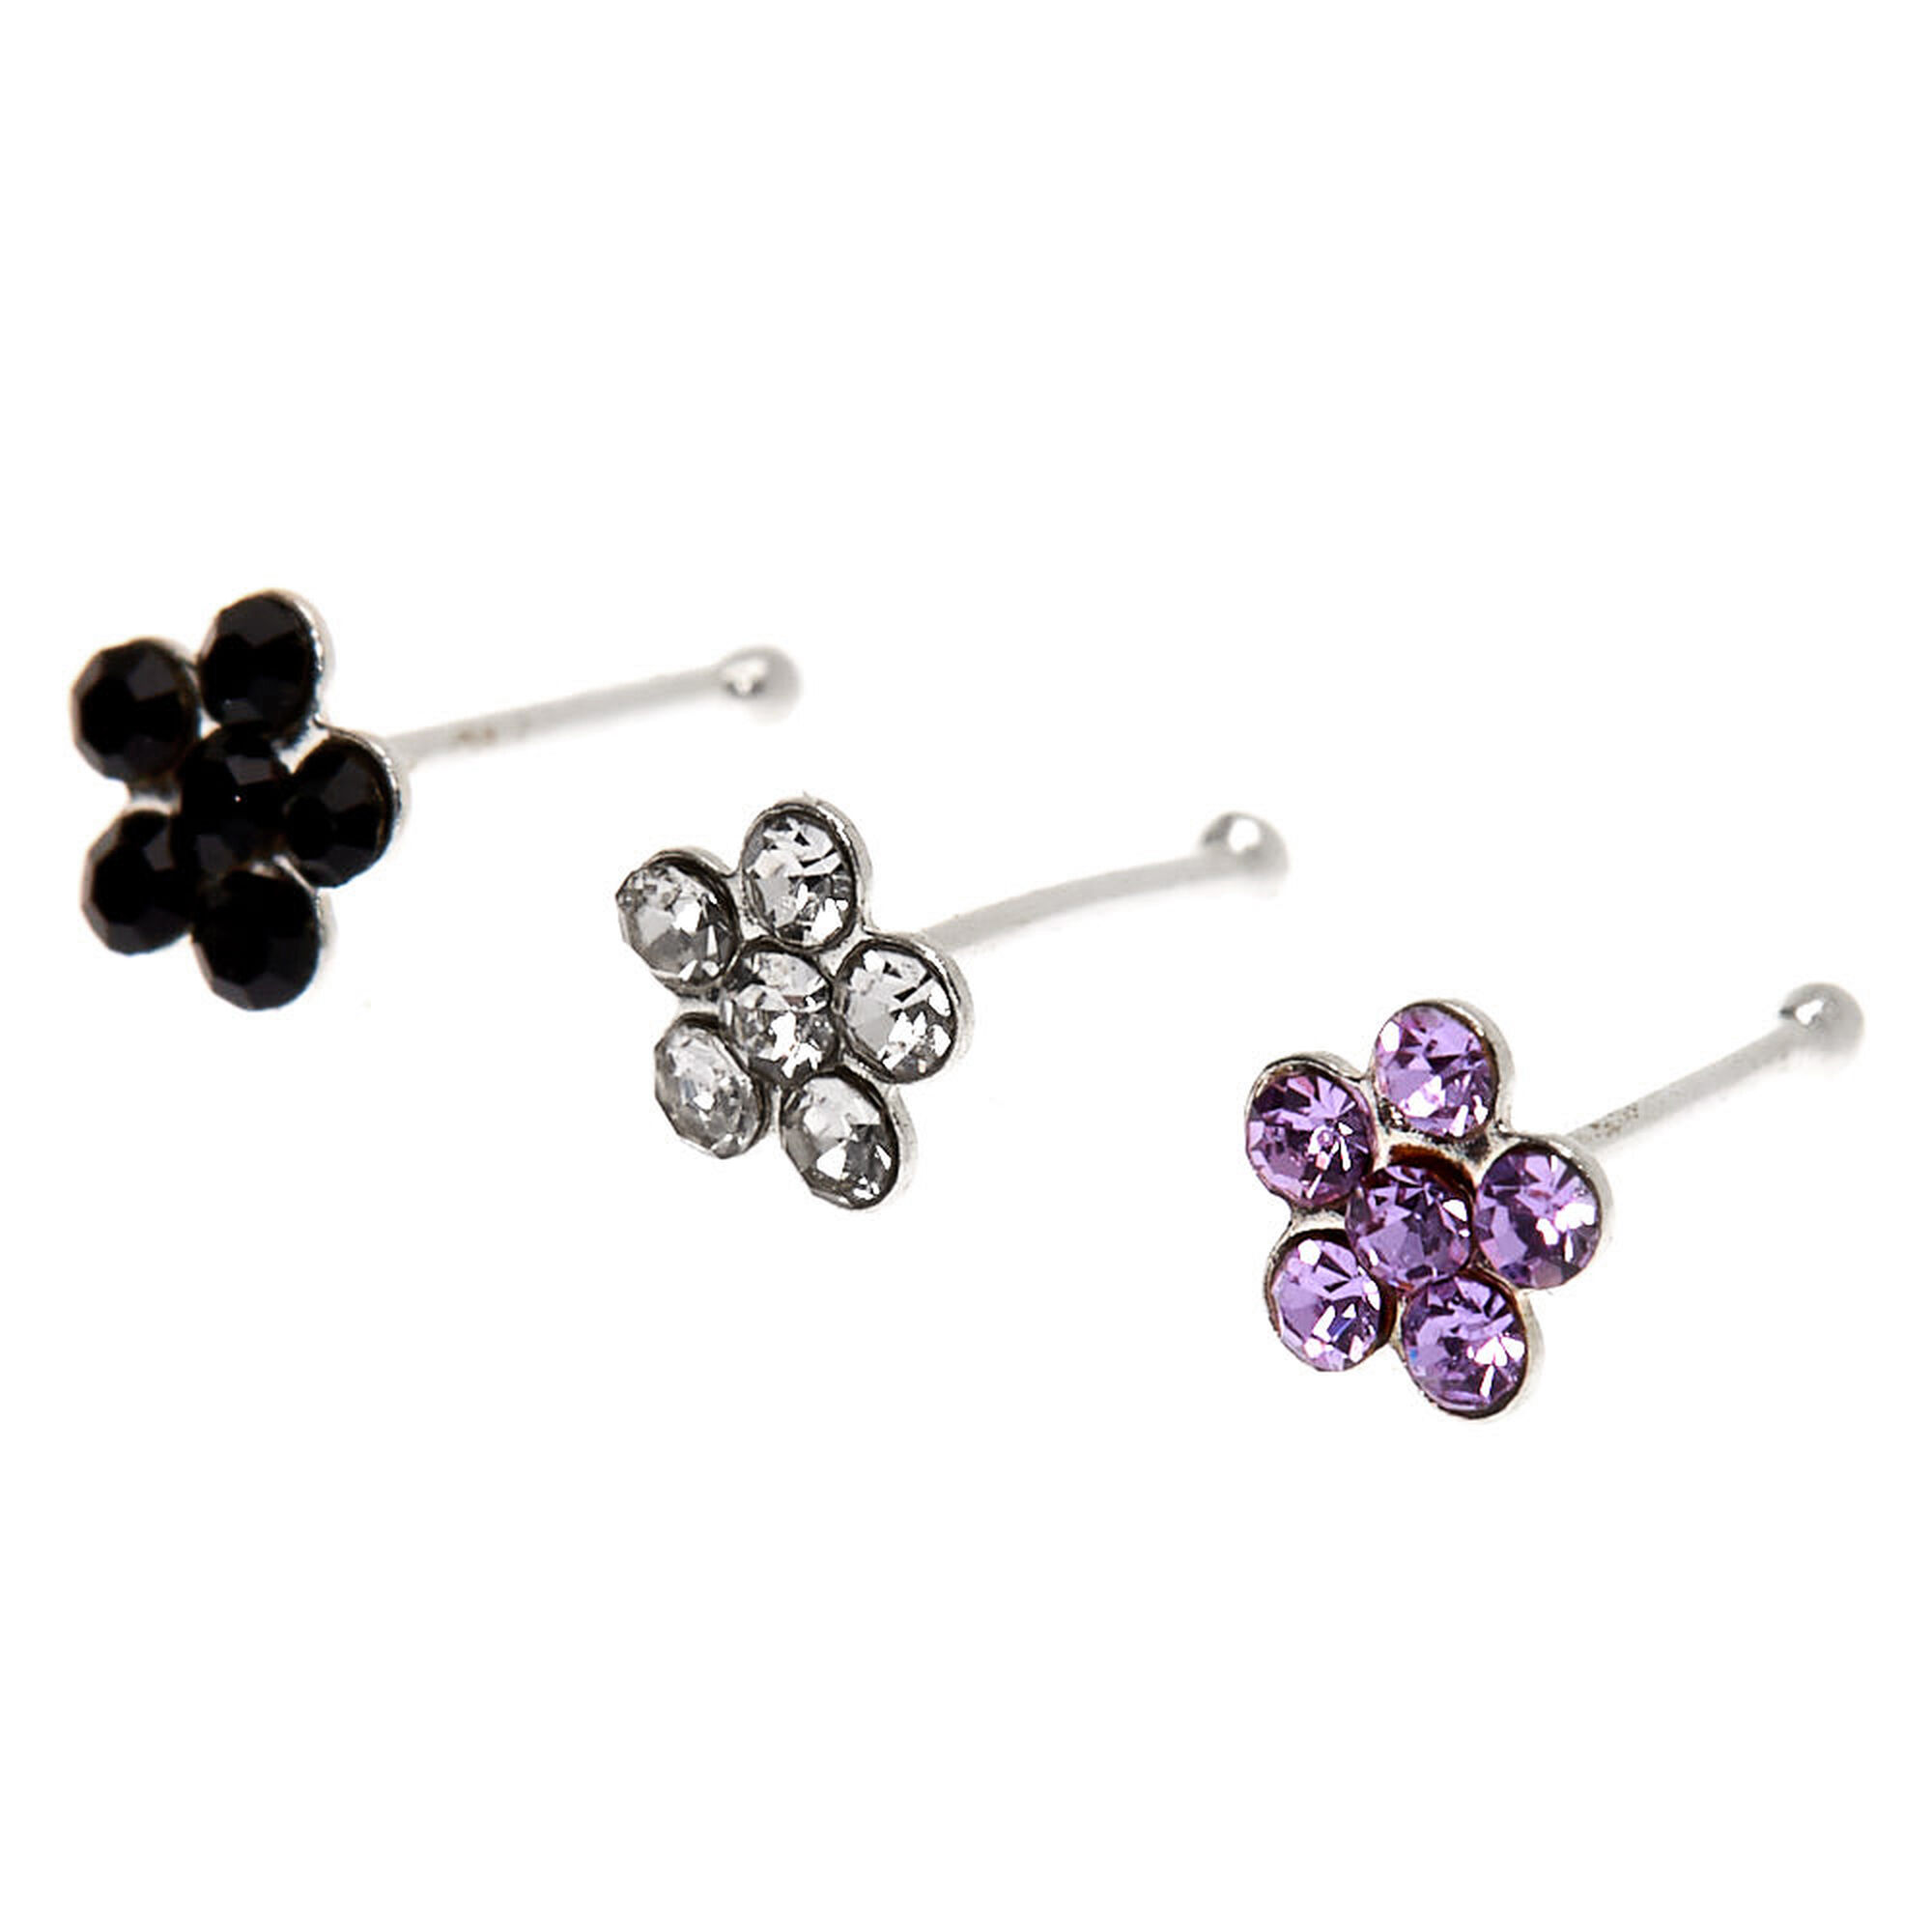 Claire's Gold Titanium 18G Flower, Heart & Star Nose Studs - 3 Pack